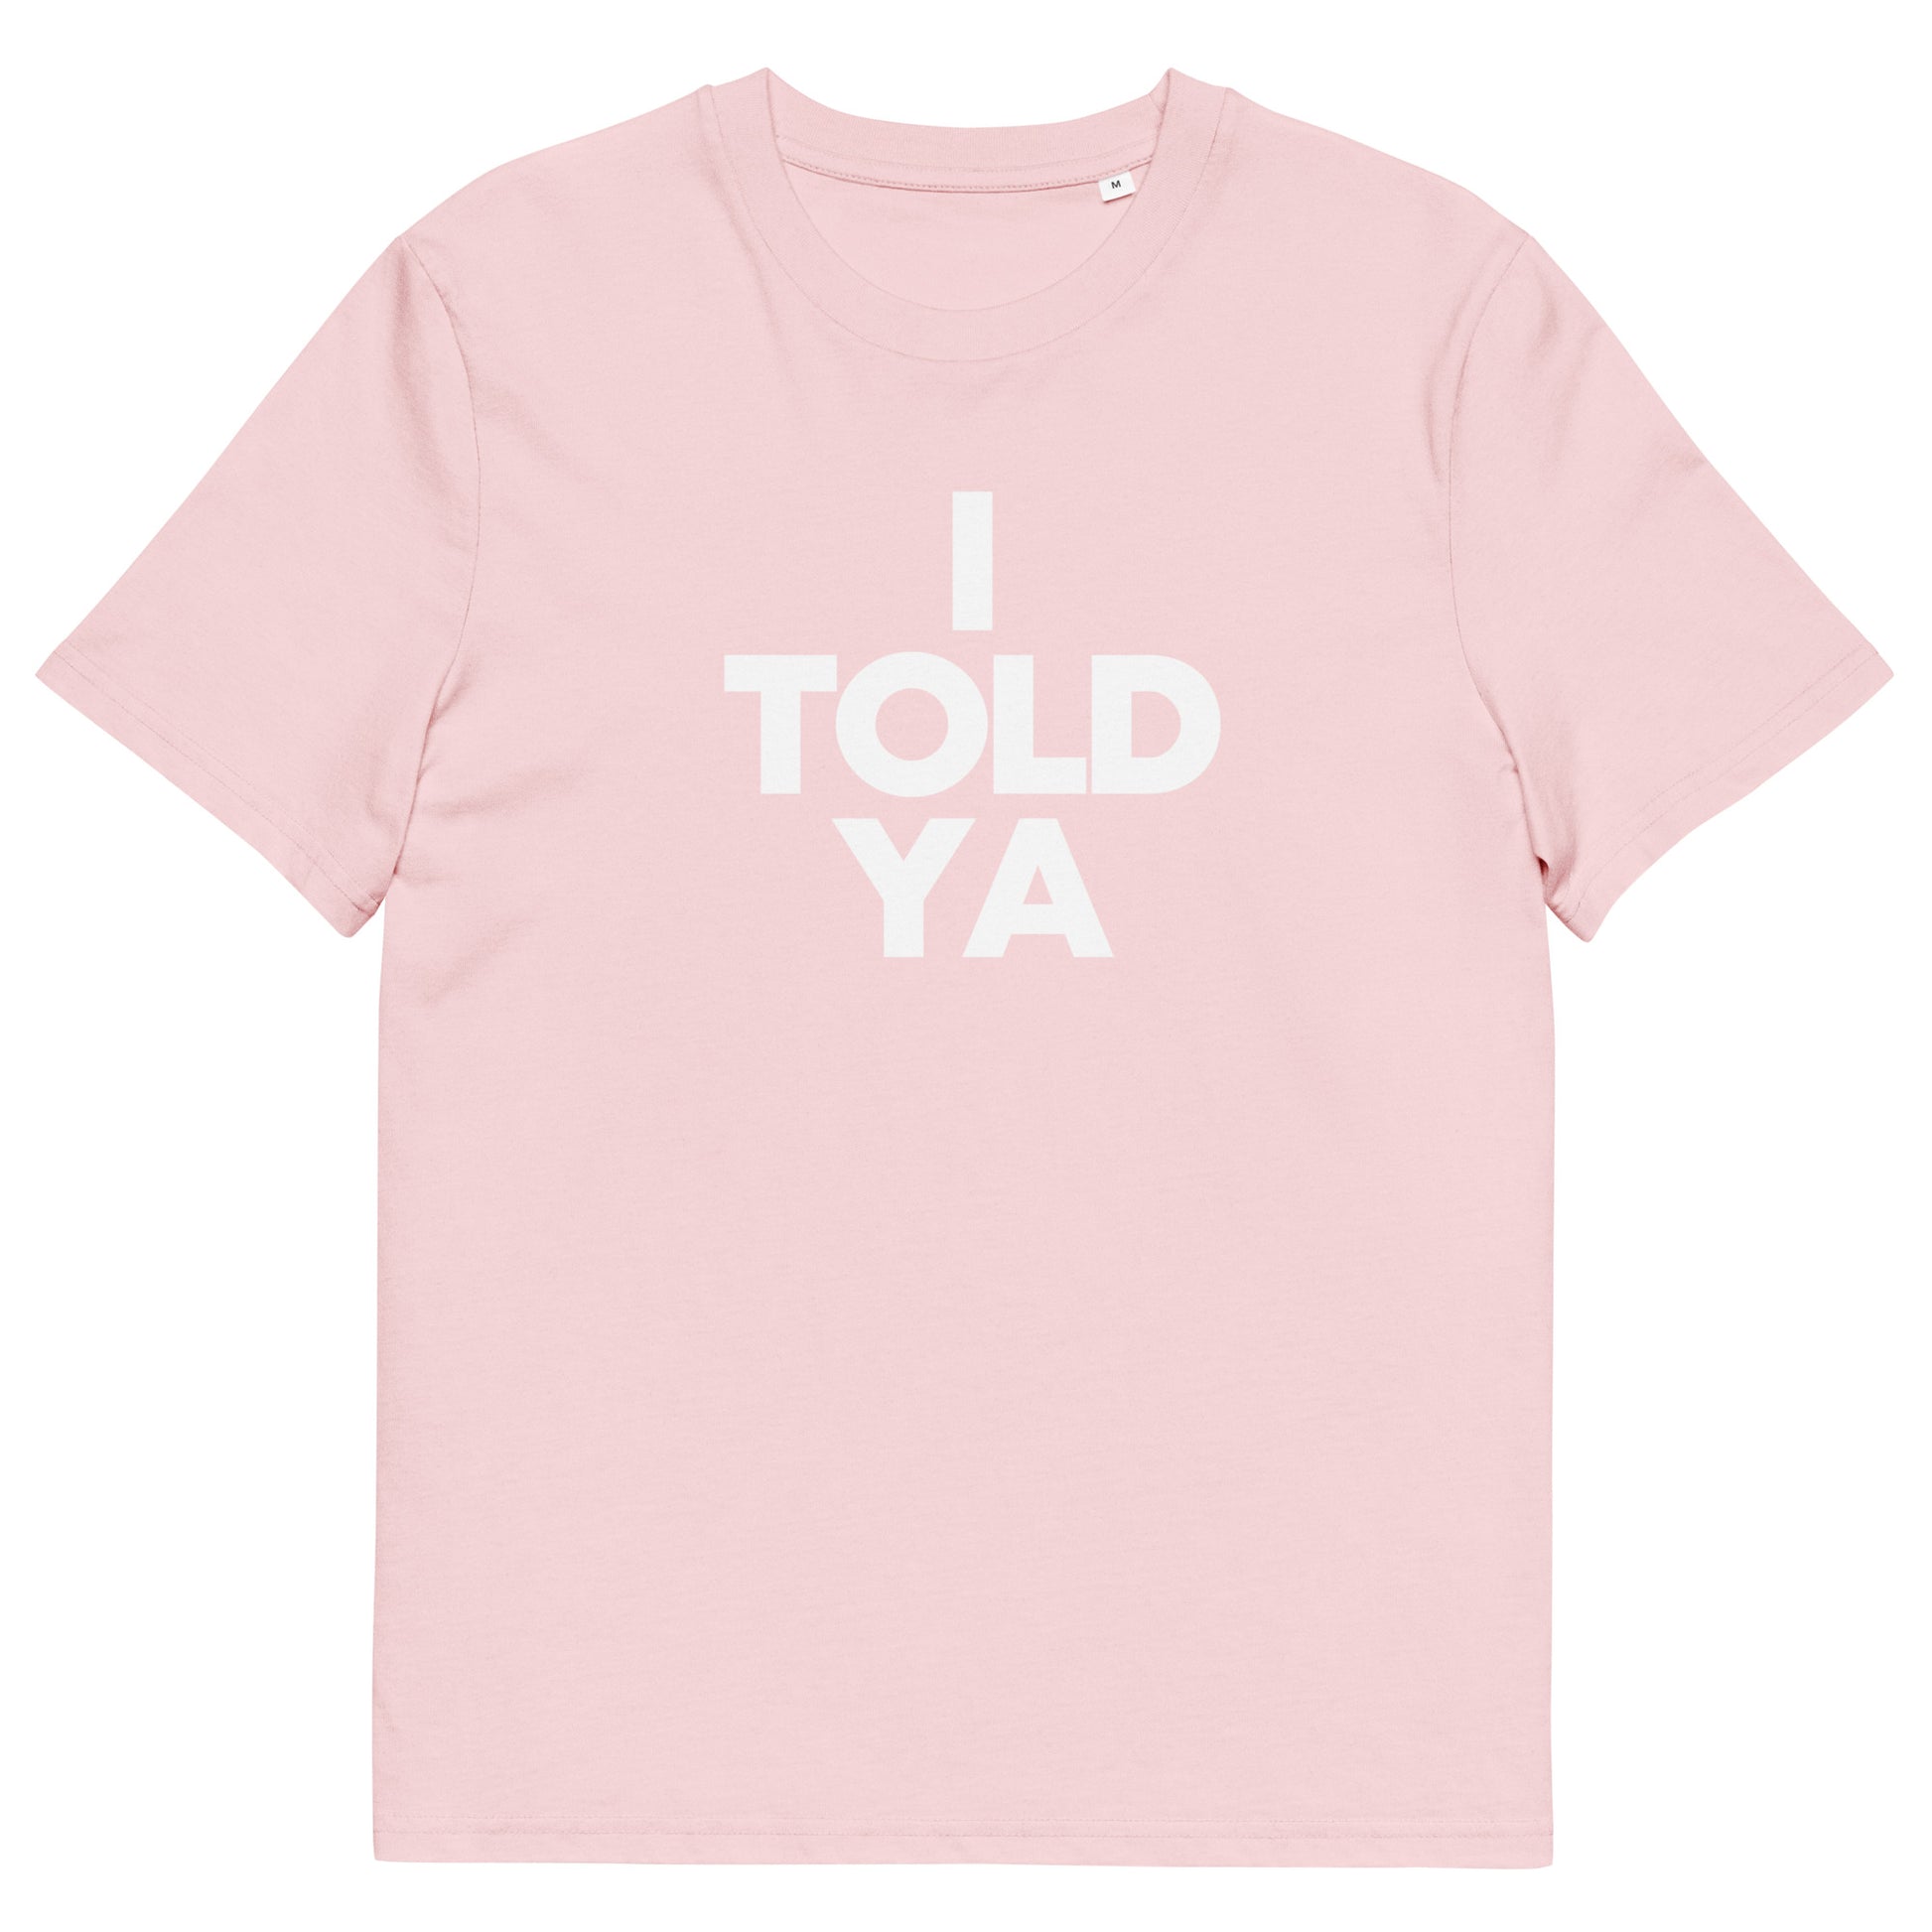 I TOLD YA t-shirt. Pink unisex. John John Kennedy. Clothes With Words apparel. Zendaya on the Callengers Film.